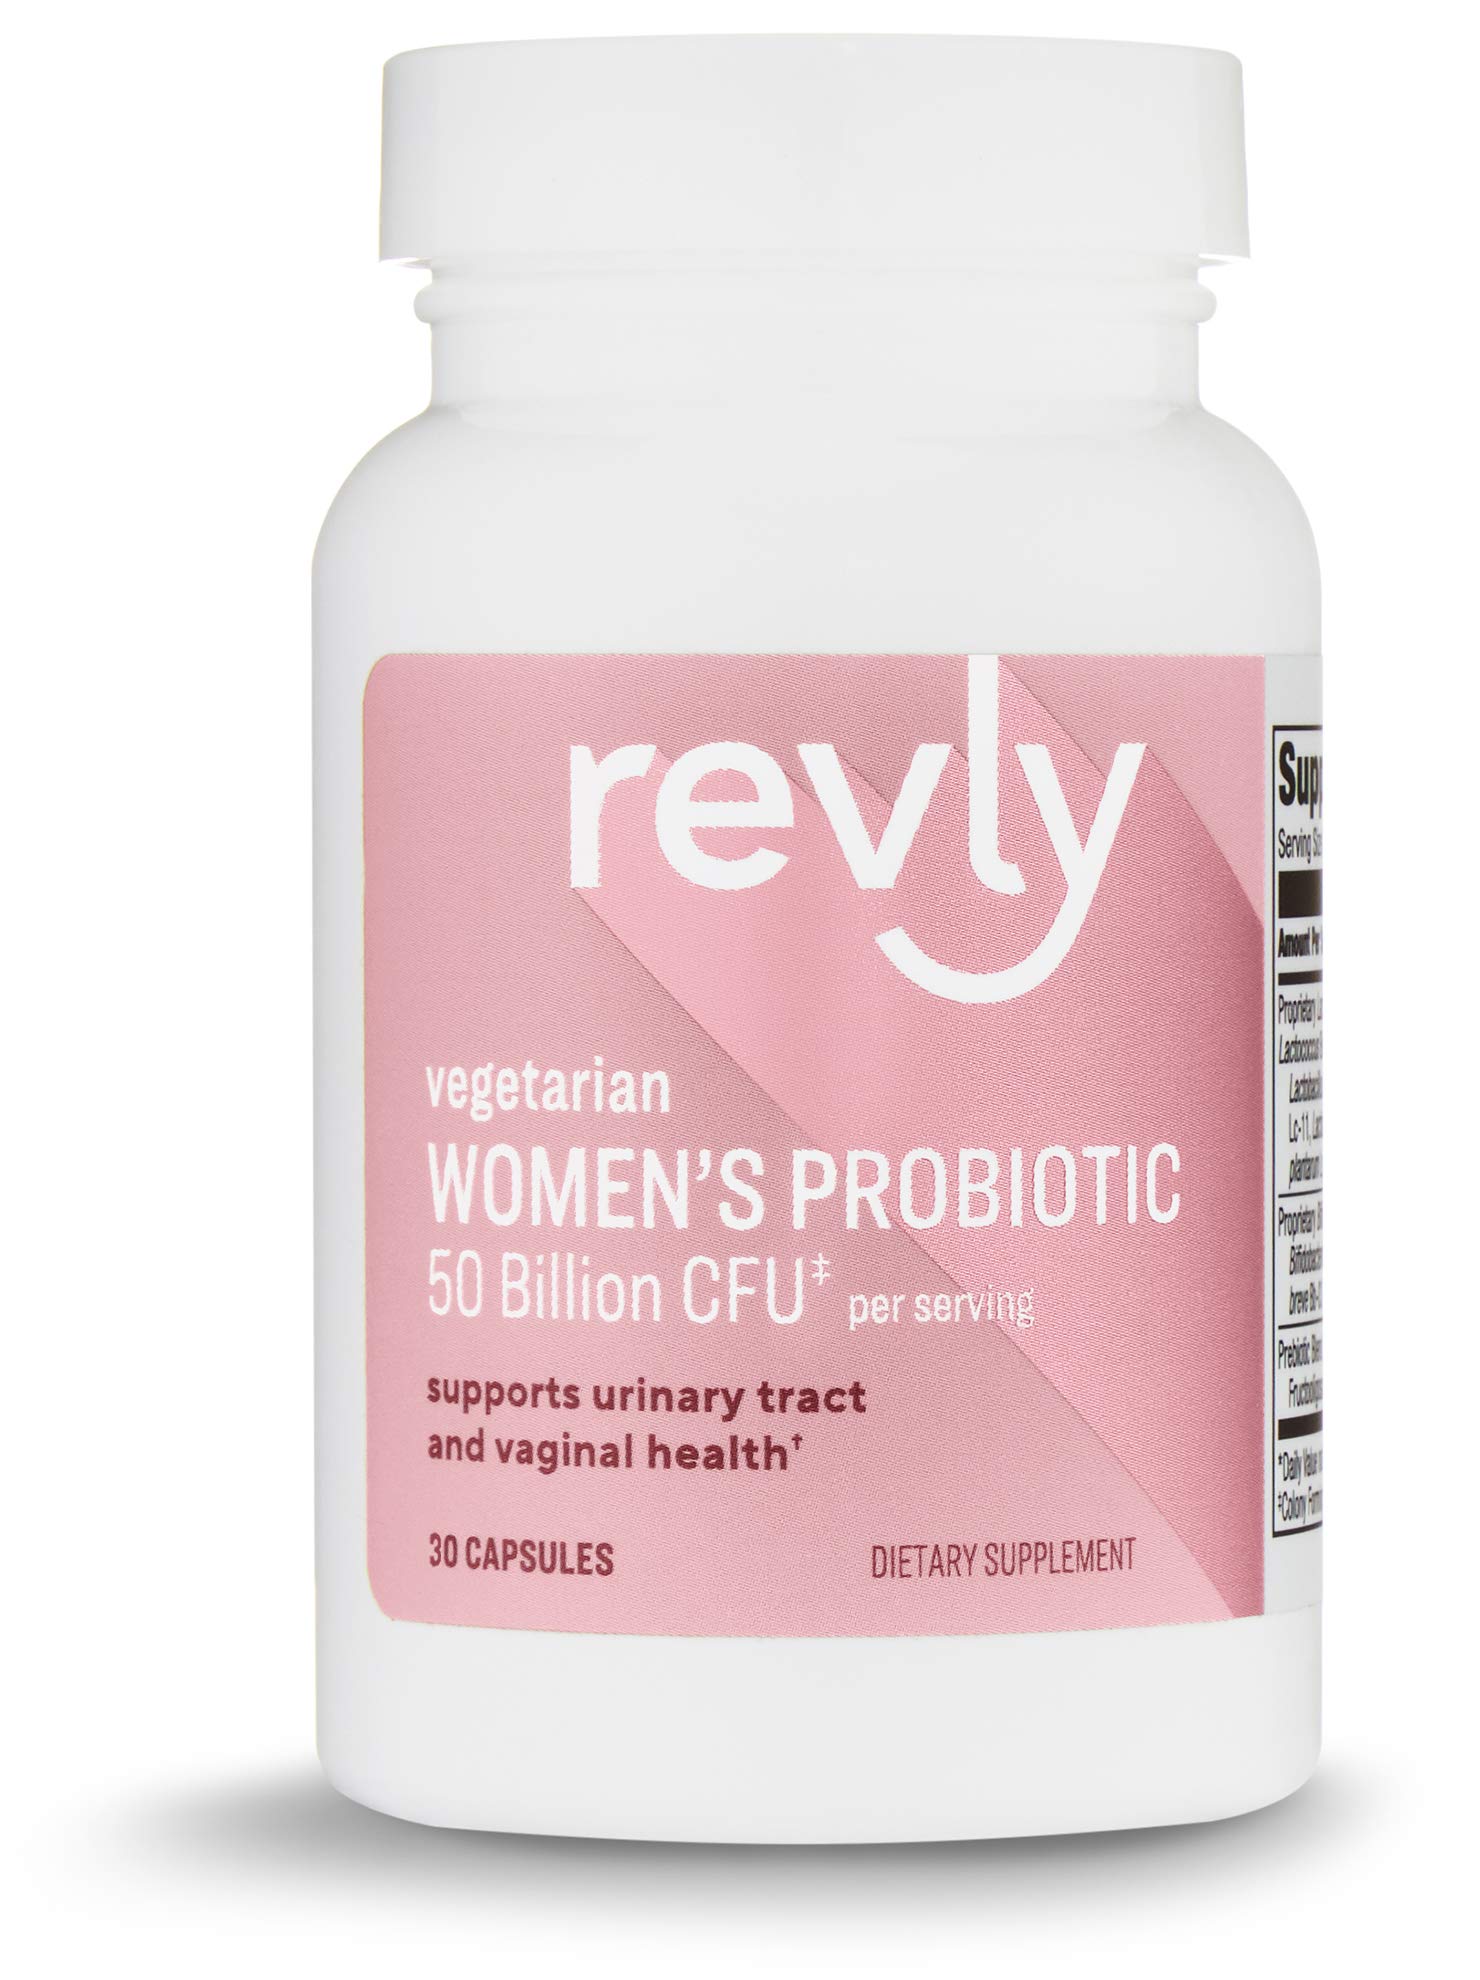 Amazon Brand - Revly One Daily Women's Probiotic, Support Urinary Tract and Vaginal Health, 50 Billion CFU (7 strains), Lactobaccilus and Bifidobacteria blend, 30 Capsules